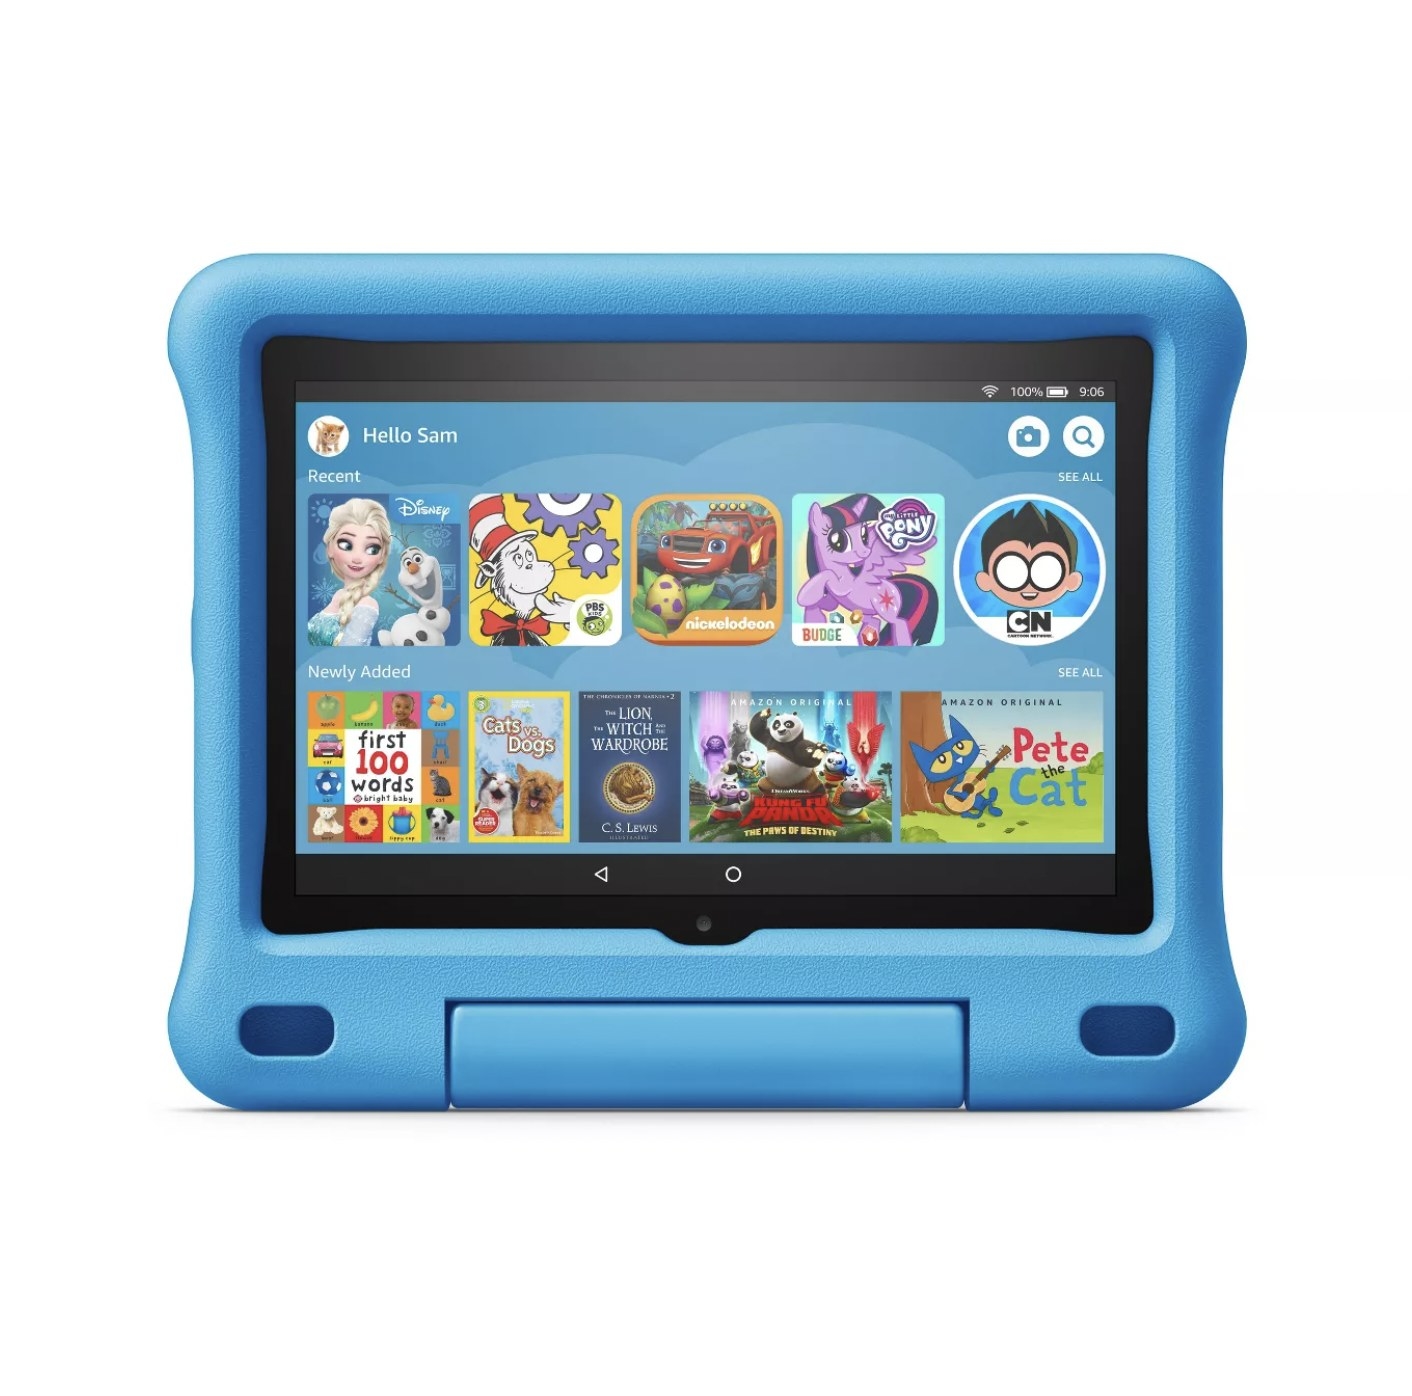 The blue touchscreen tablet